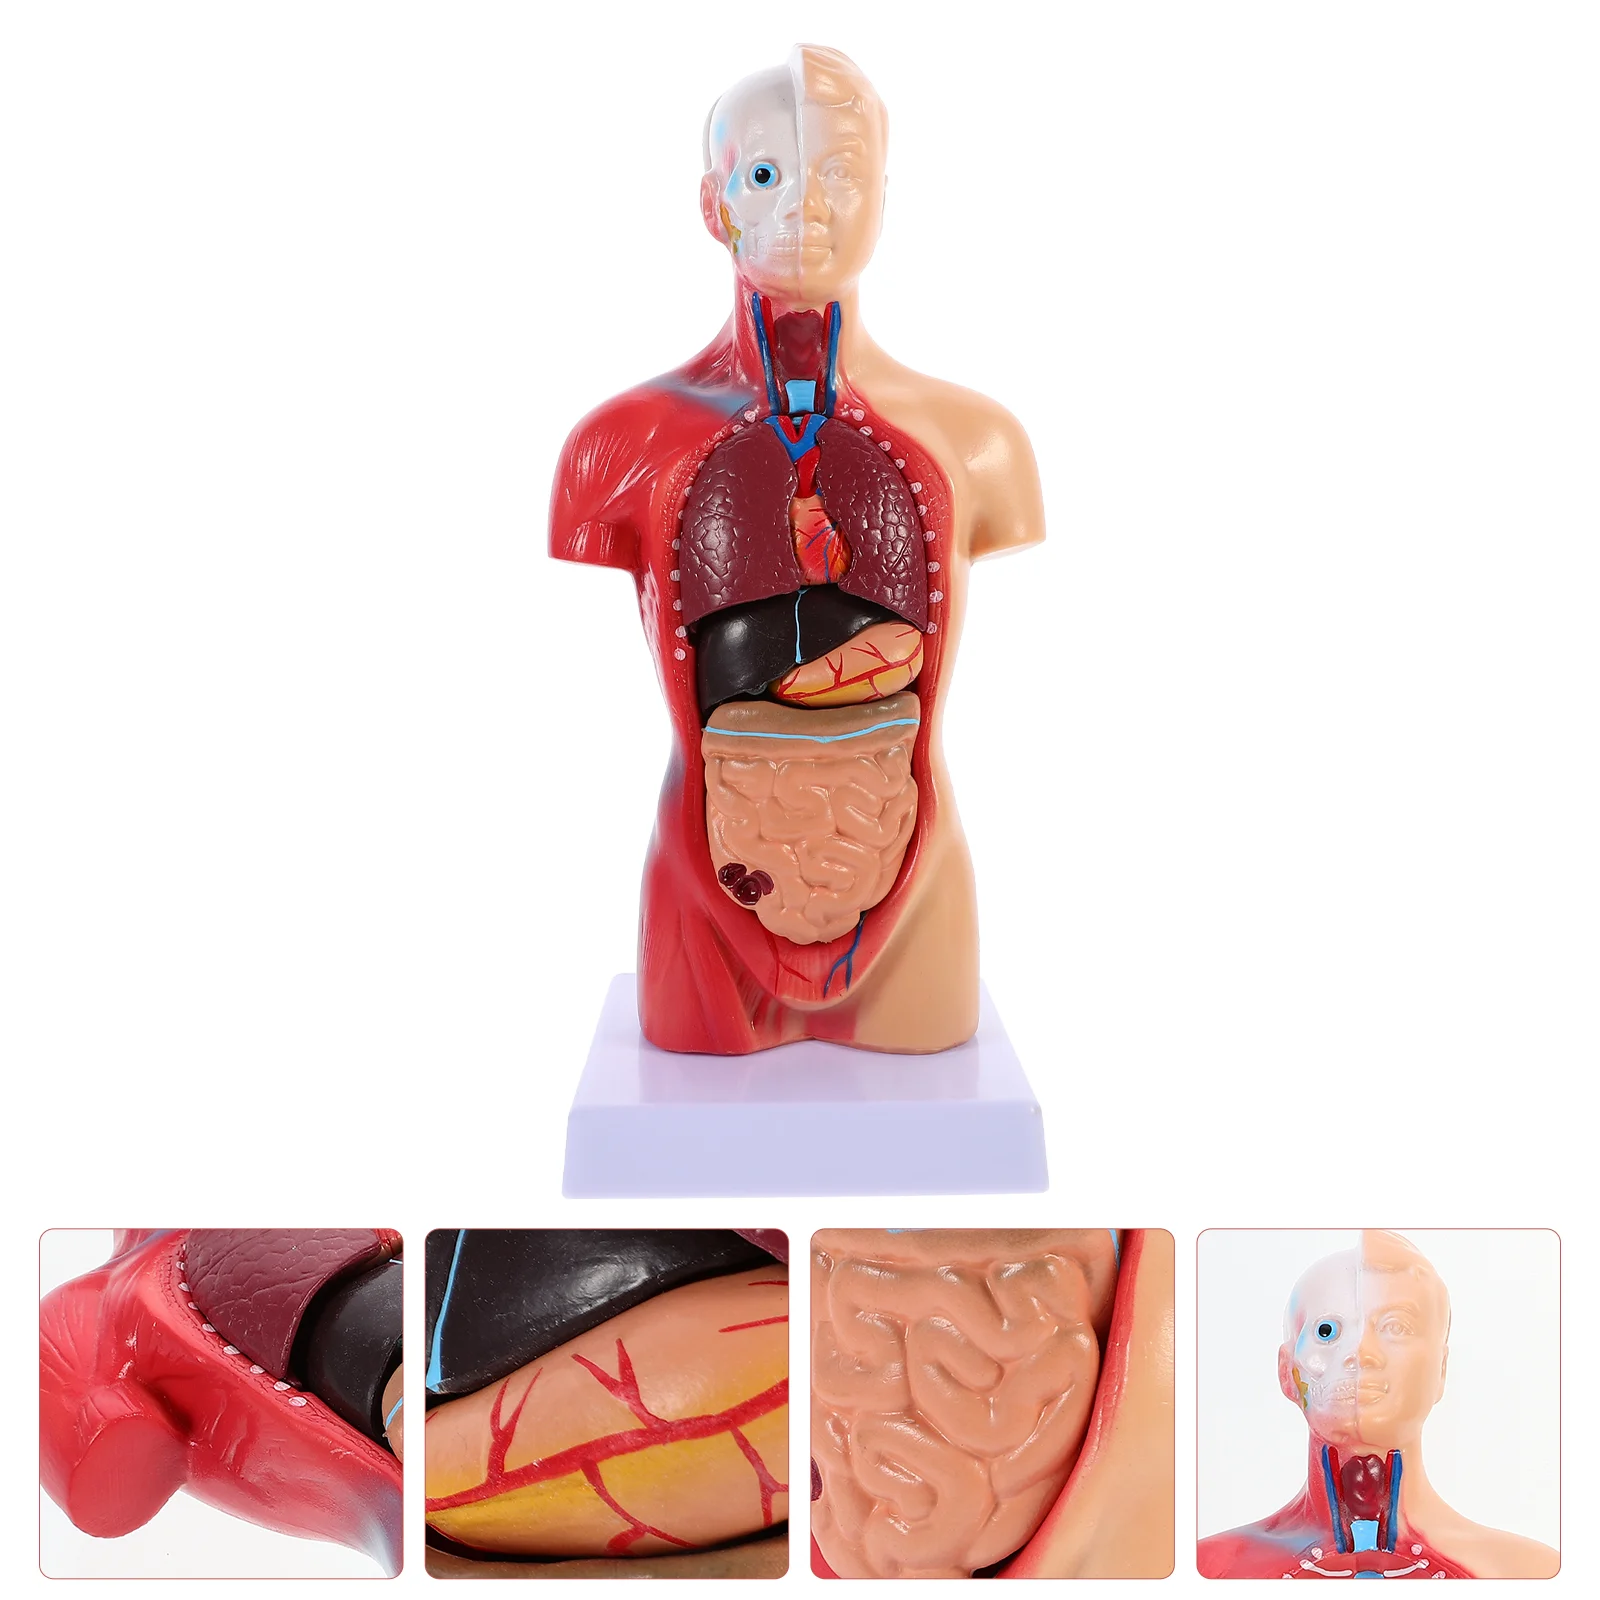 

Mannequin Kids Anatomical Teaching Model Human Body Puzzle School Educational Tool Pvc Child Anatomy Torso Injection Greys